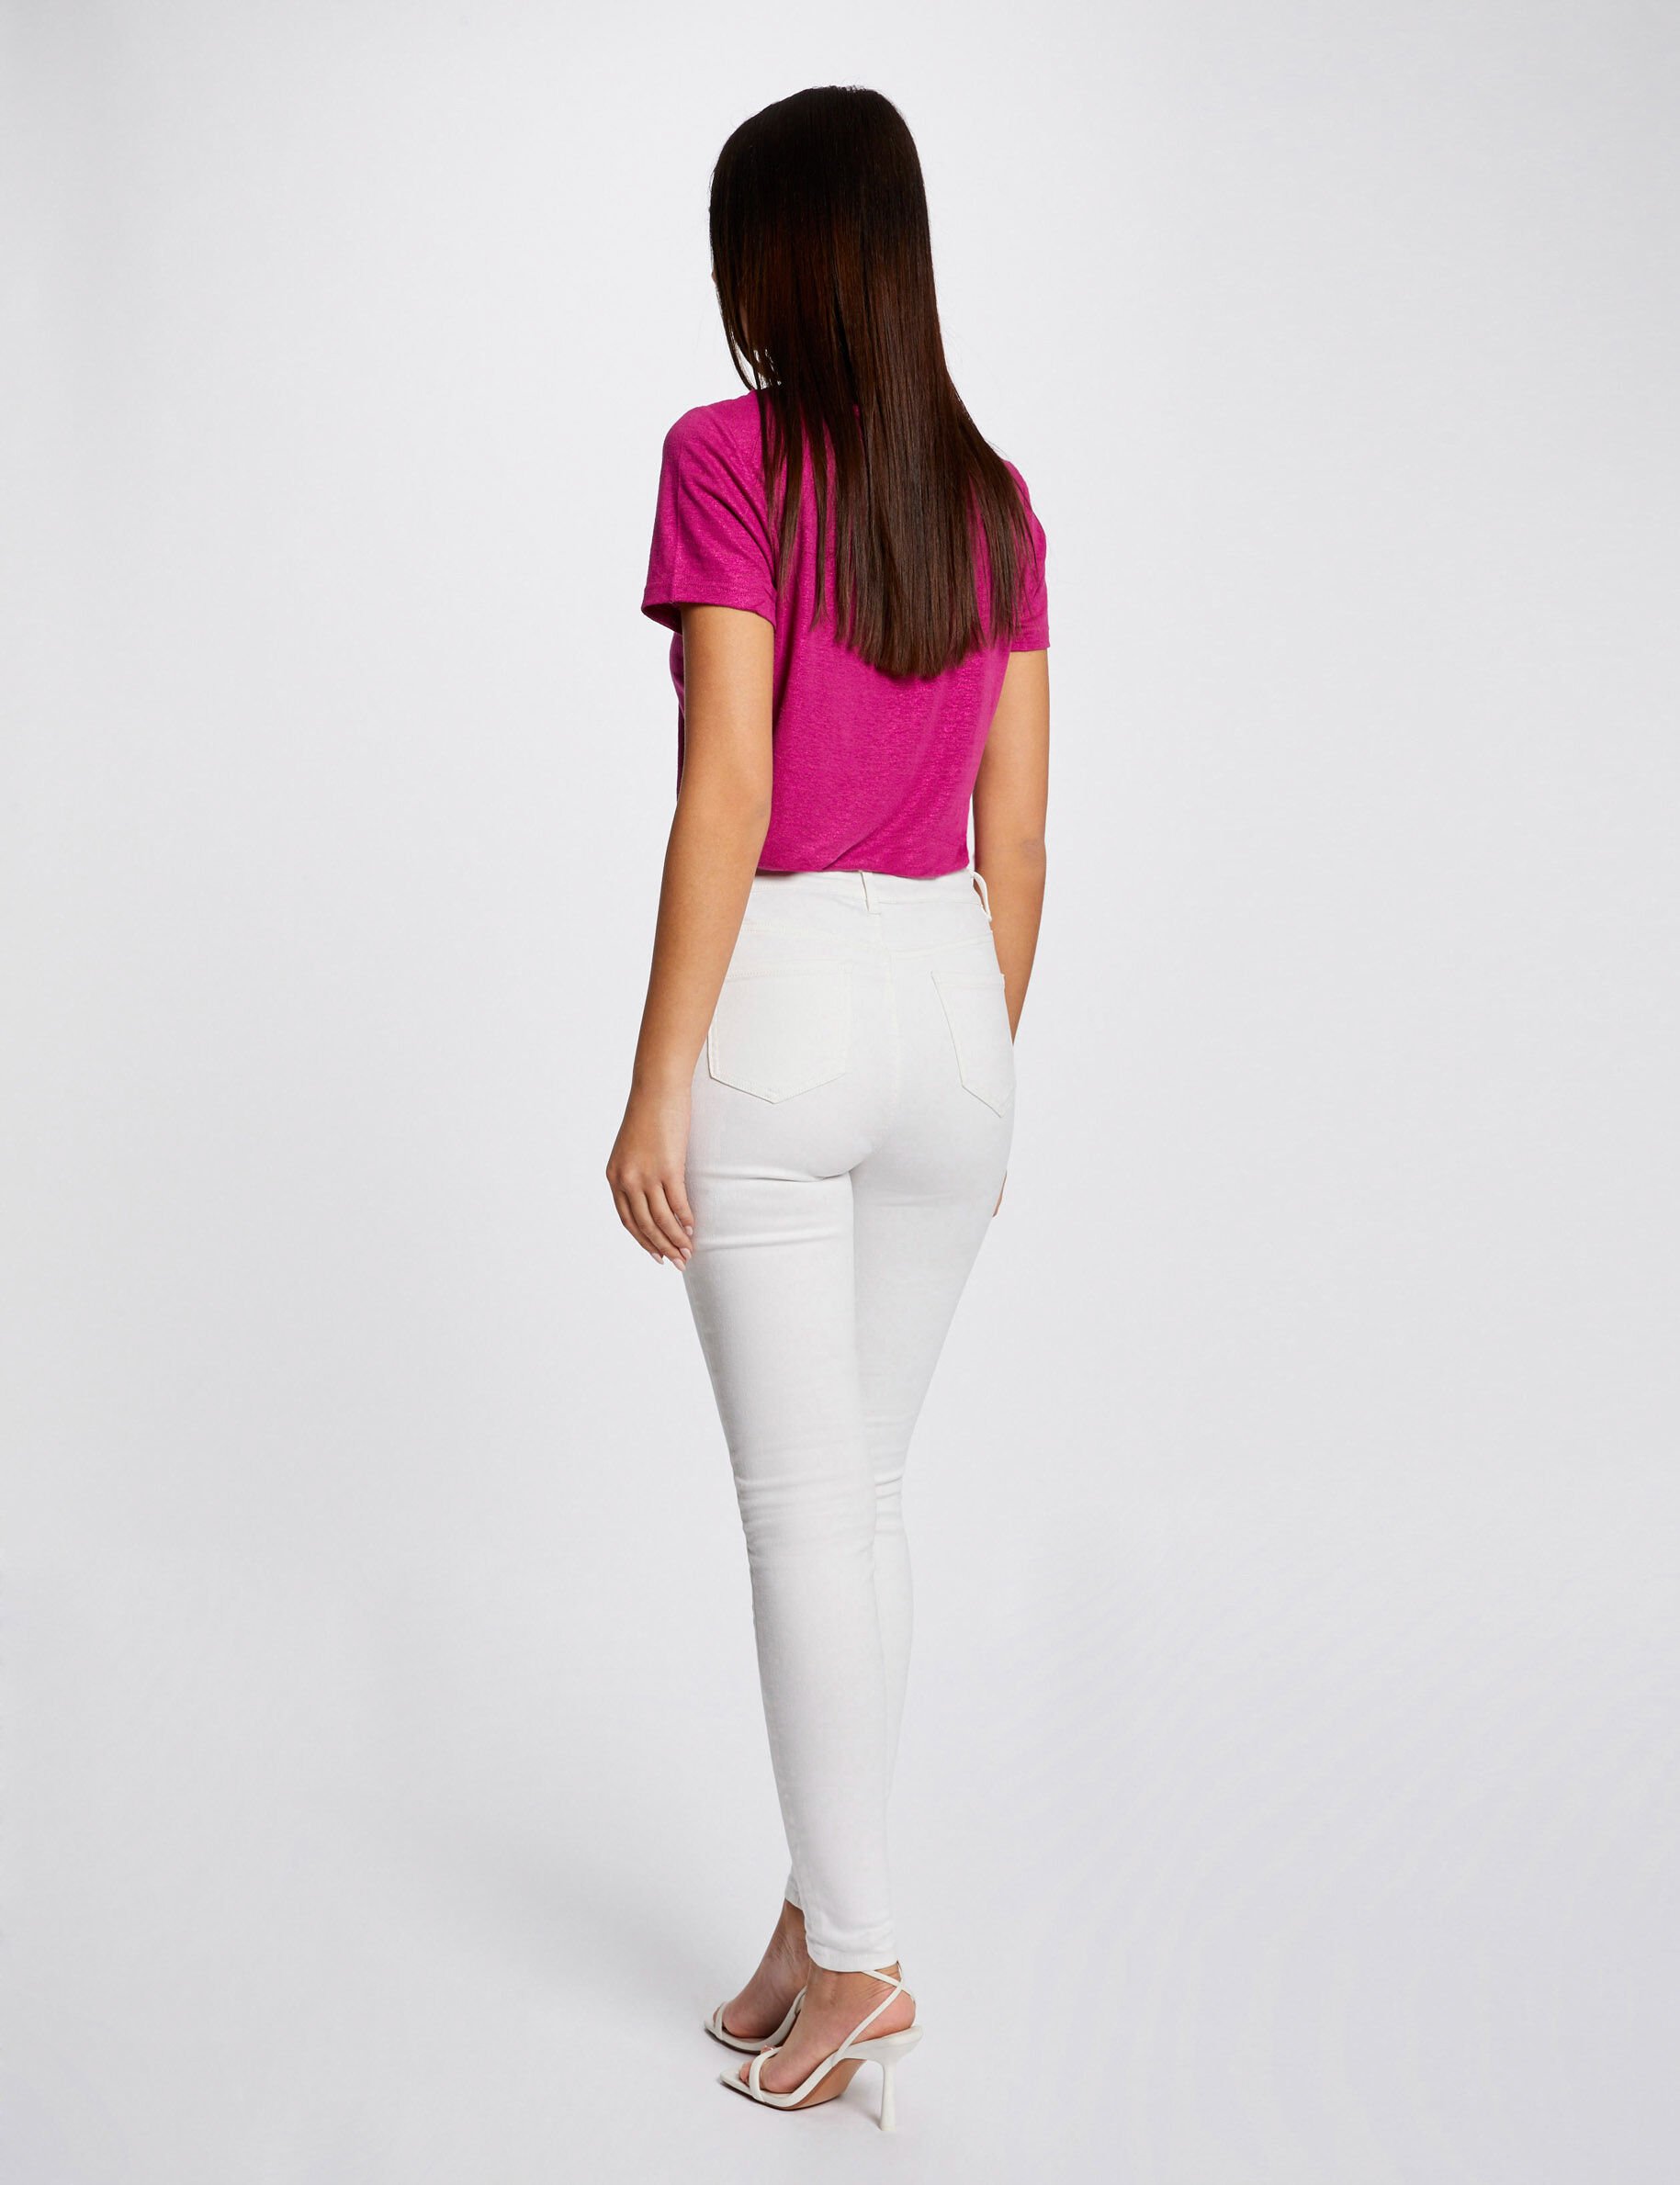 Slim Trousers in the color white for Women on sale  FASHIOLAin